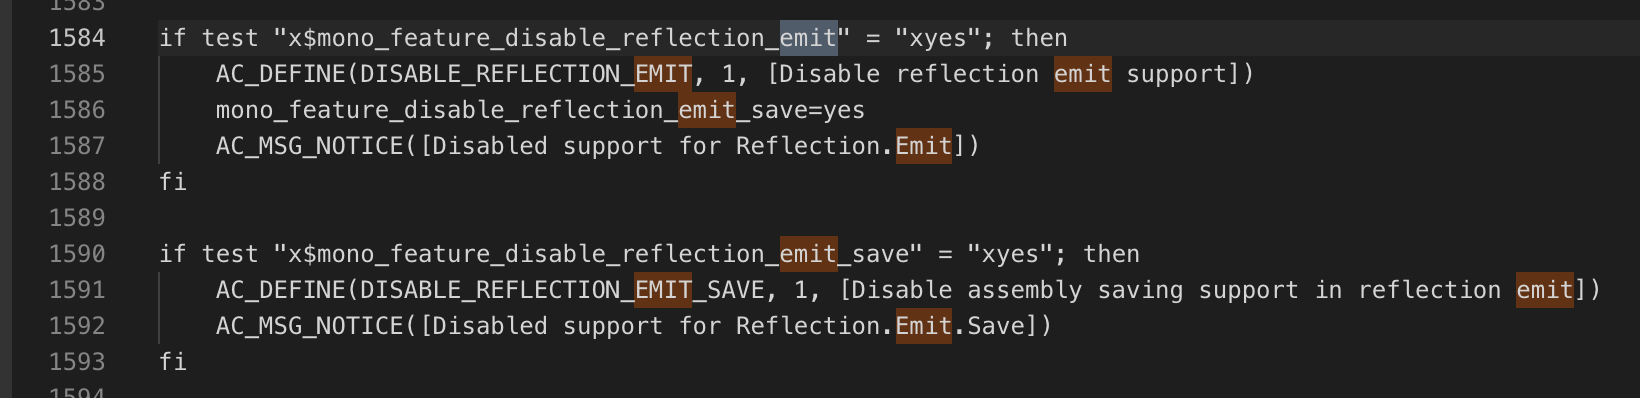 screenshot shows approximately 10 lines/two 'paragraphs' of configure.ac beginning with the line 'if test "x$mono<em>feature</em>disable<em>reflection</em>emit" = "xyes". both 'paragraphs' should be removed